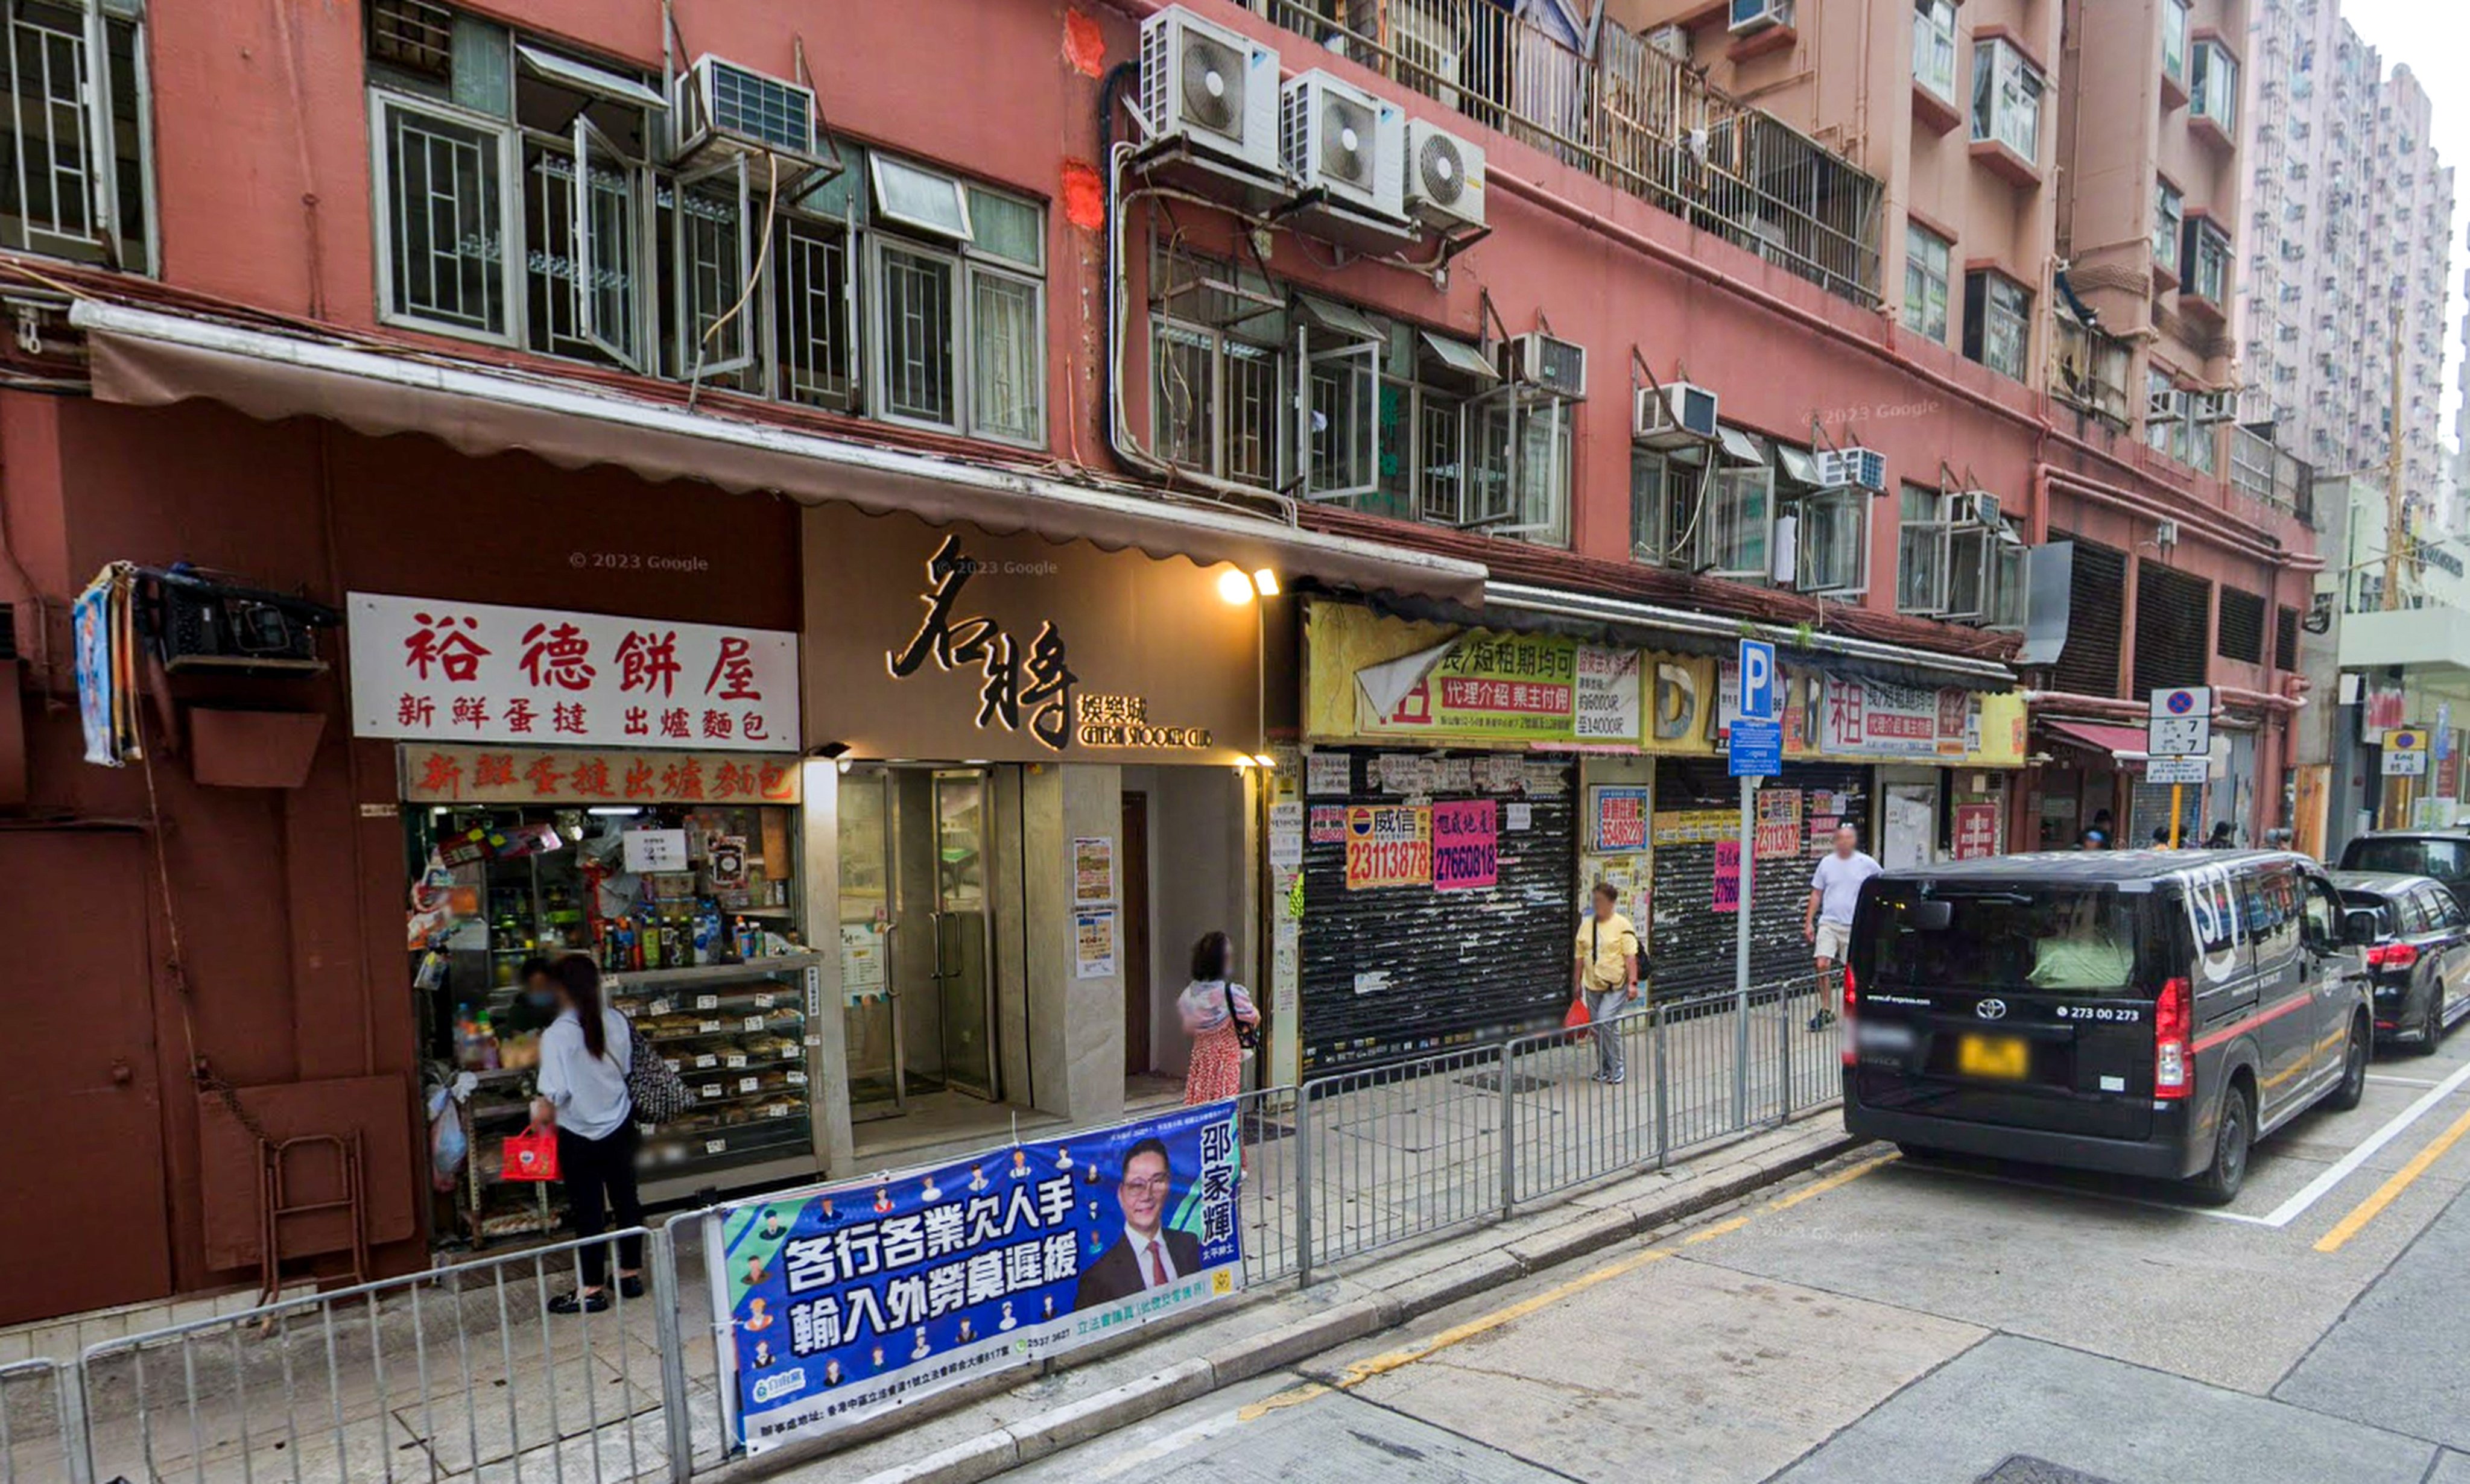 The attack took place on Pau Chung Street in To Kwan Wan. Photo: Google Maps